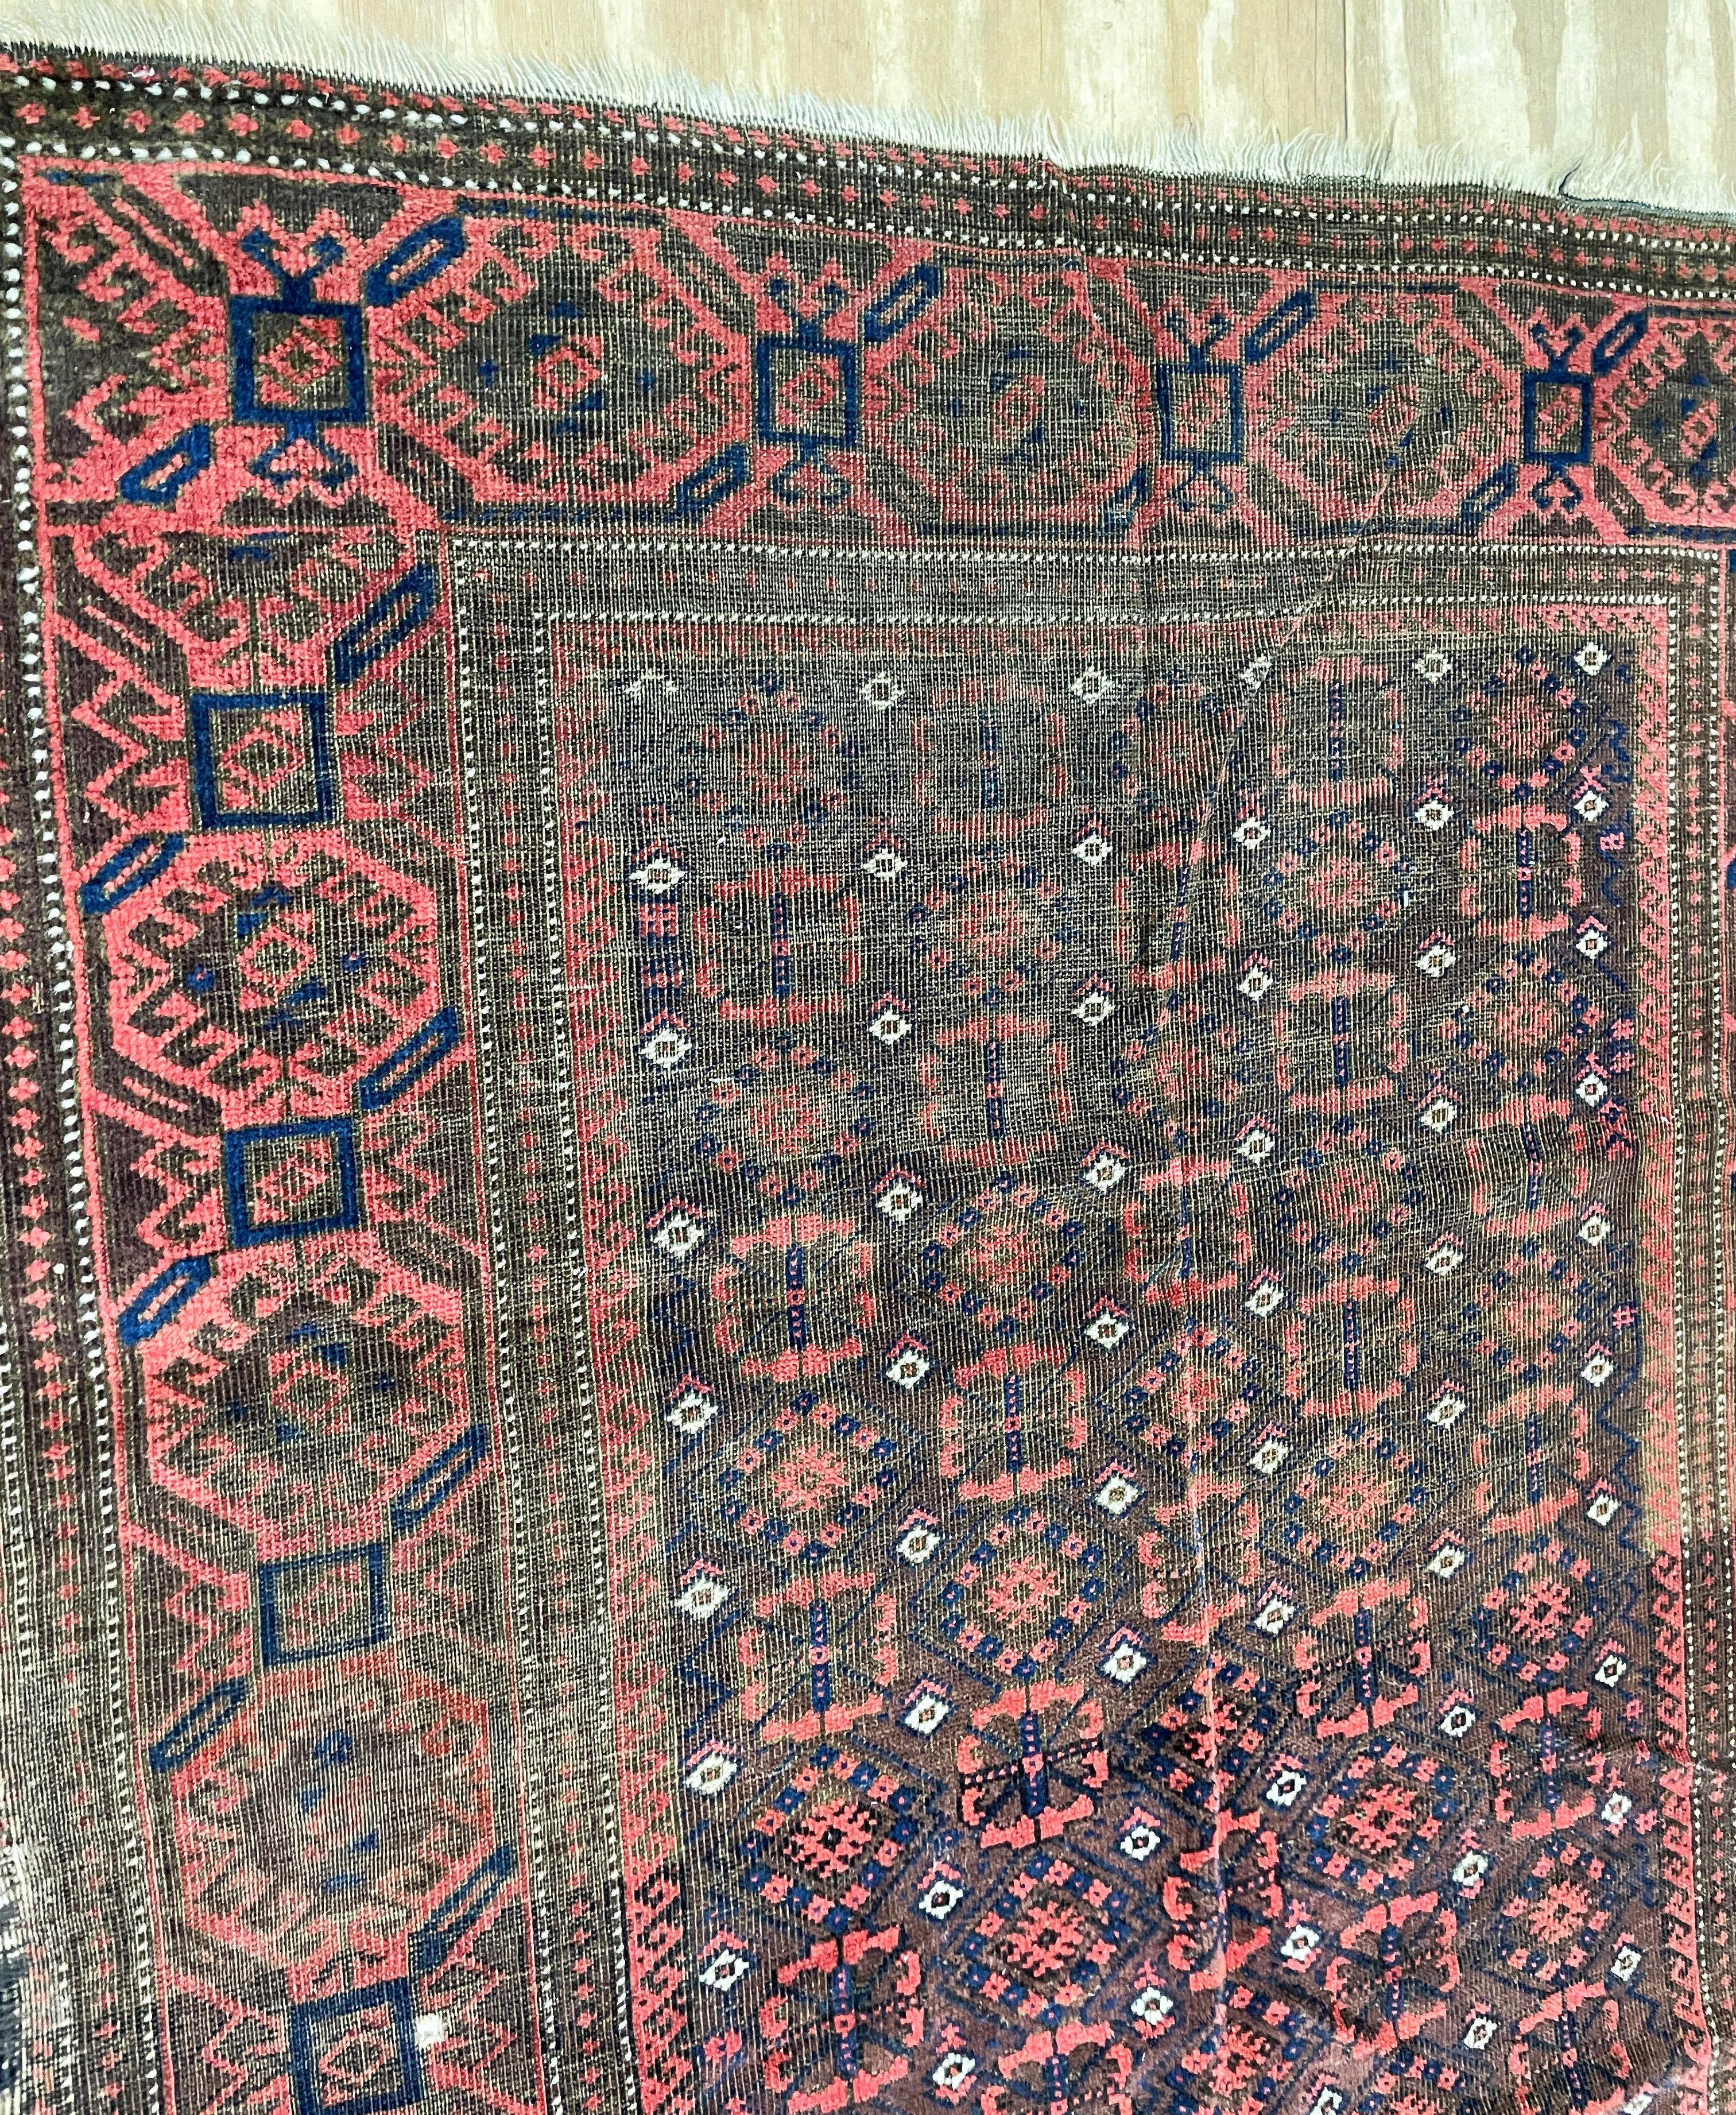 
Experience the Timeless Elegance of a Belouch Turkoman Rug

Step into a world of craftsmanship and tradition with a remarkable antique Belouch turkoman rug measuring 3'11